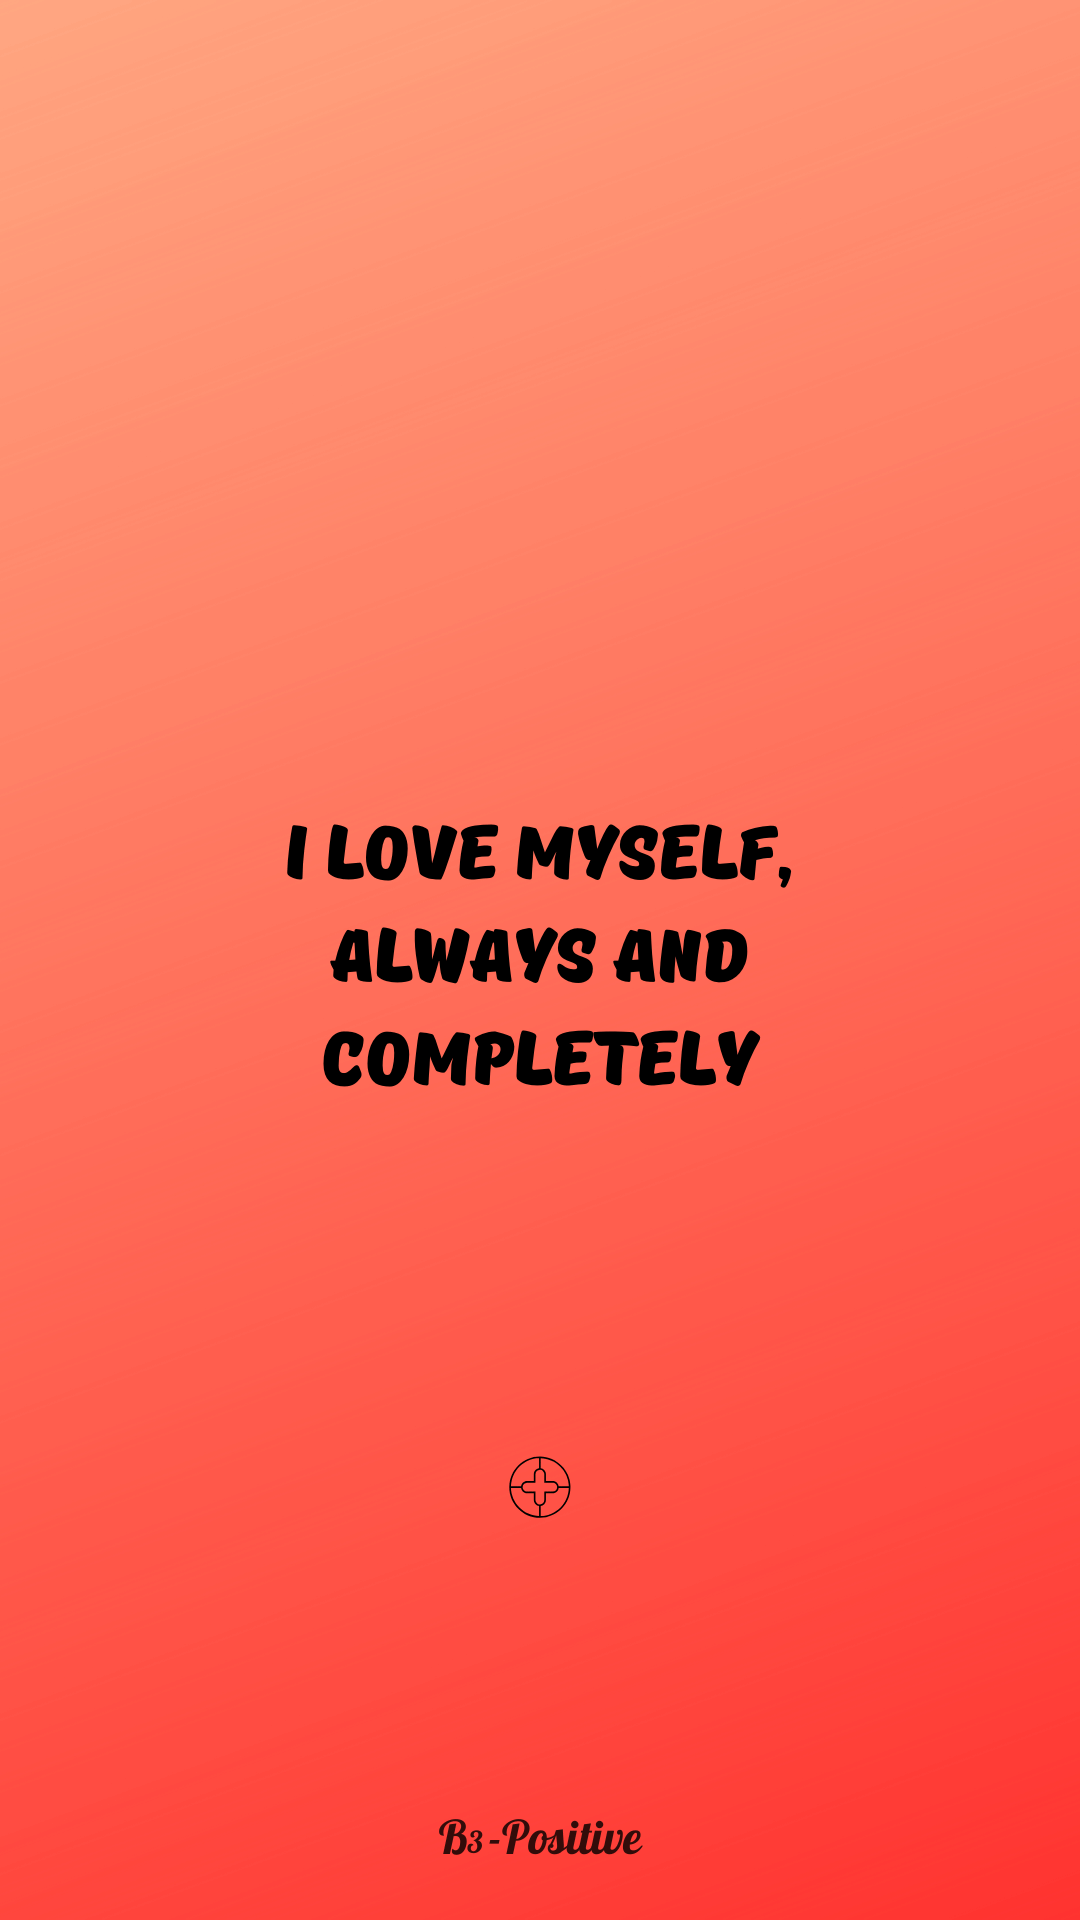 Affirmations For Self Love Phone Wallpaper